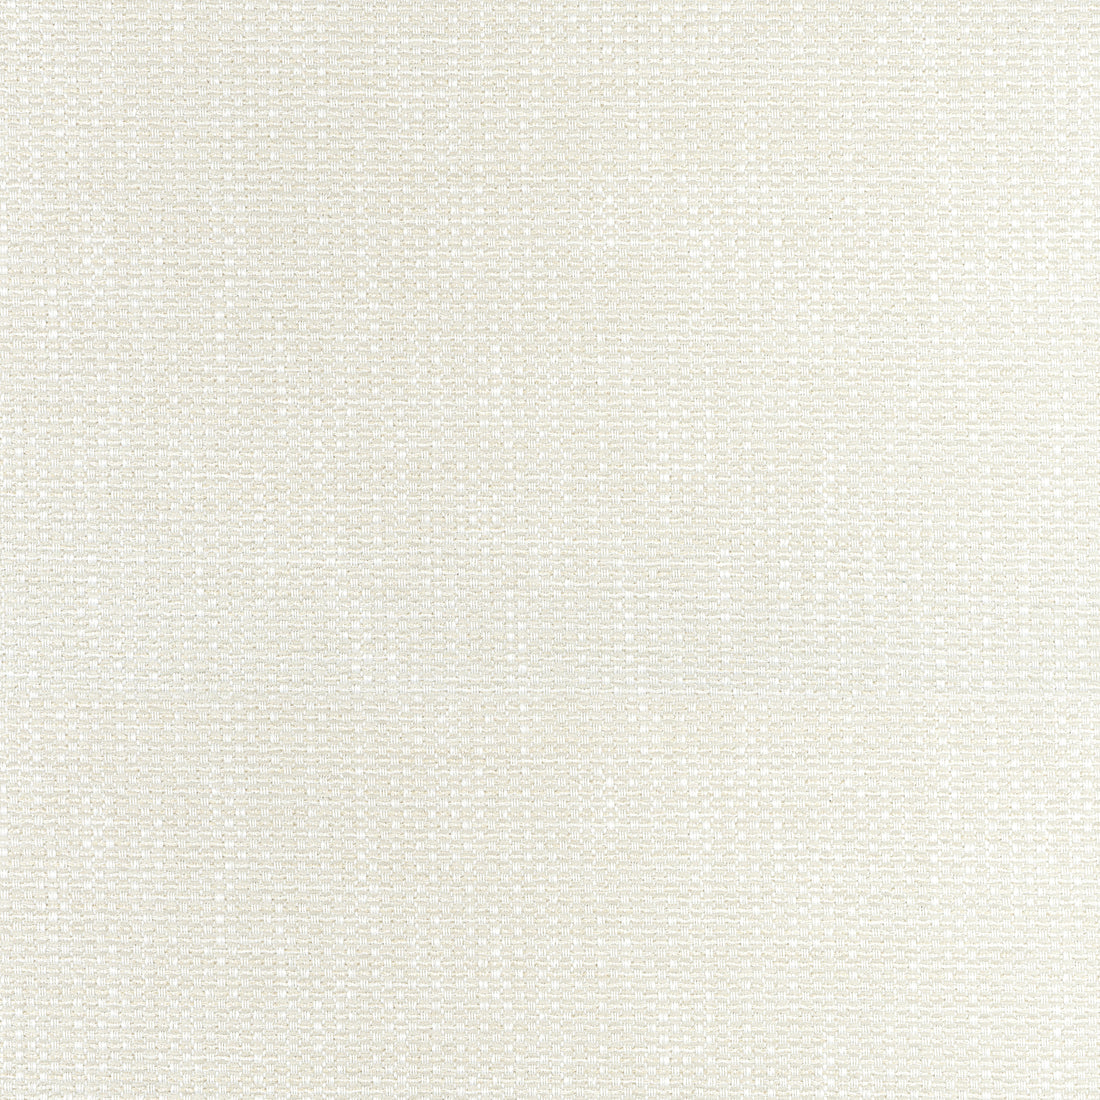 Cascade fabric in parchment color - pattern number W75252 - by Thibaut in the Elements collection